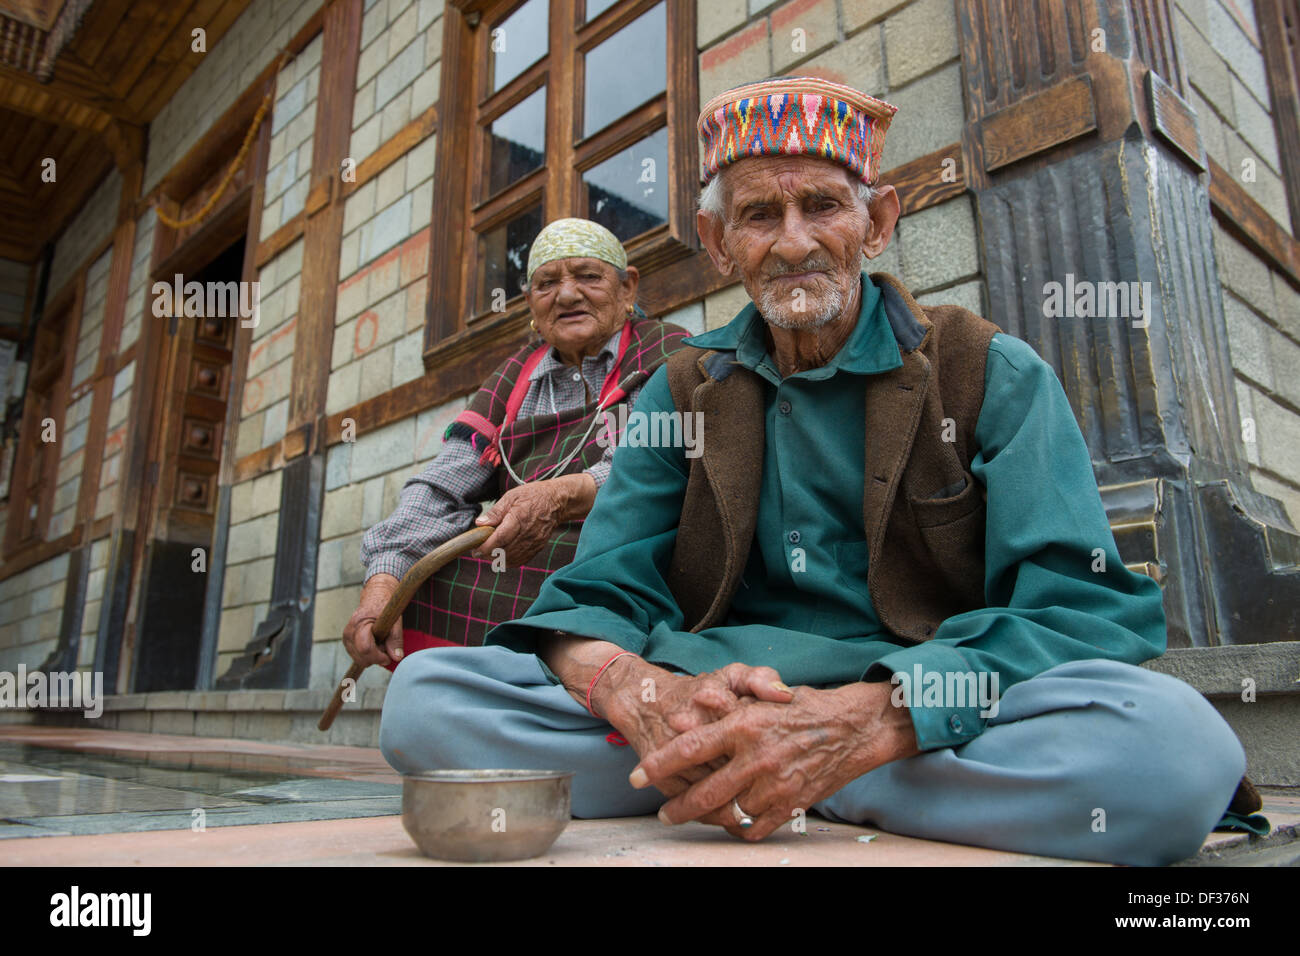 Elderly couple sitting in front of the Manu Temple, Old Manali, Manali, Himachal Pradesh, India Stock Photo